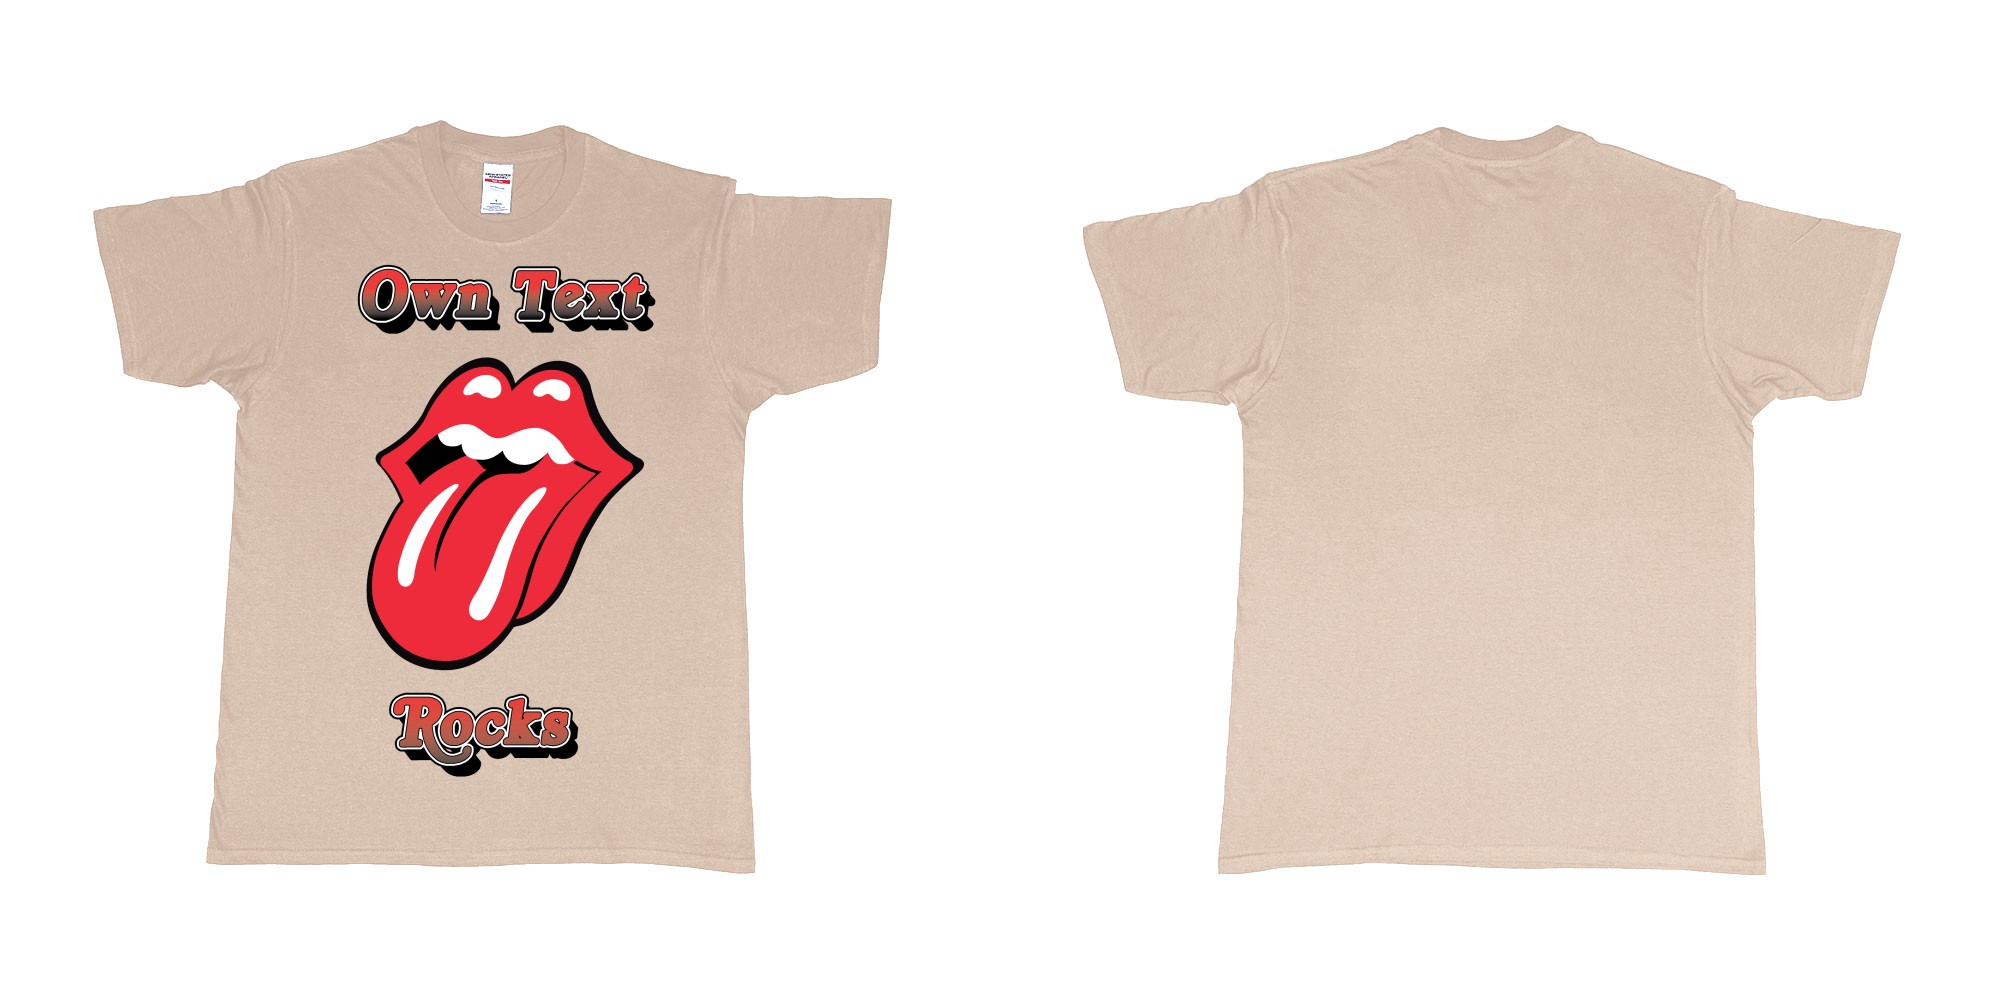 Custom tshirt design own custom text rocks rolling stones logo red tongue and lips print bali in fabric color sand choice your own text made in Bali by The Pirate Way